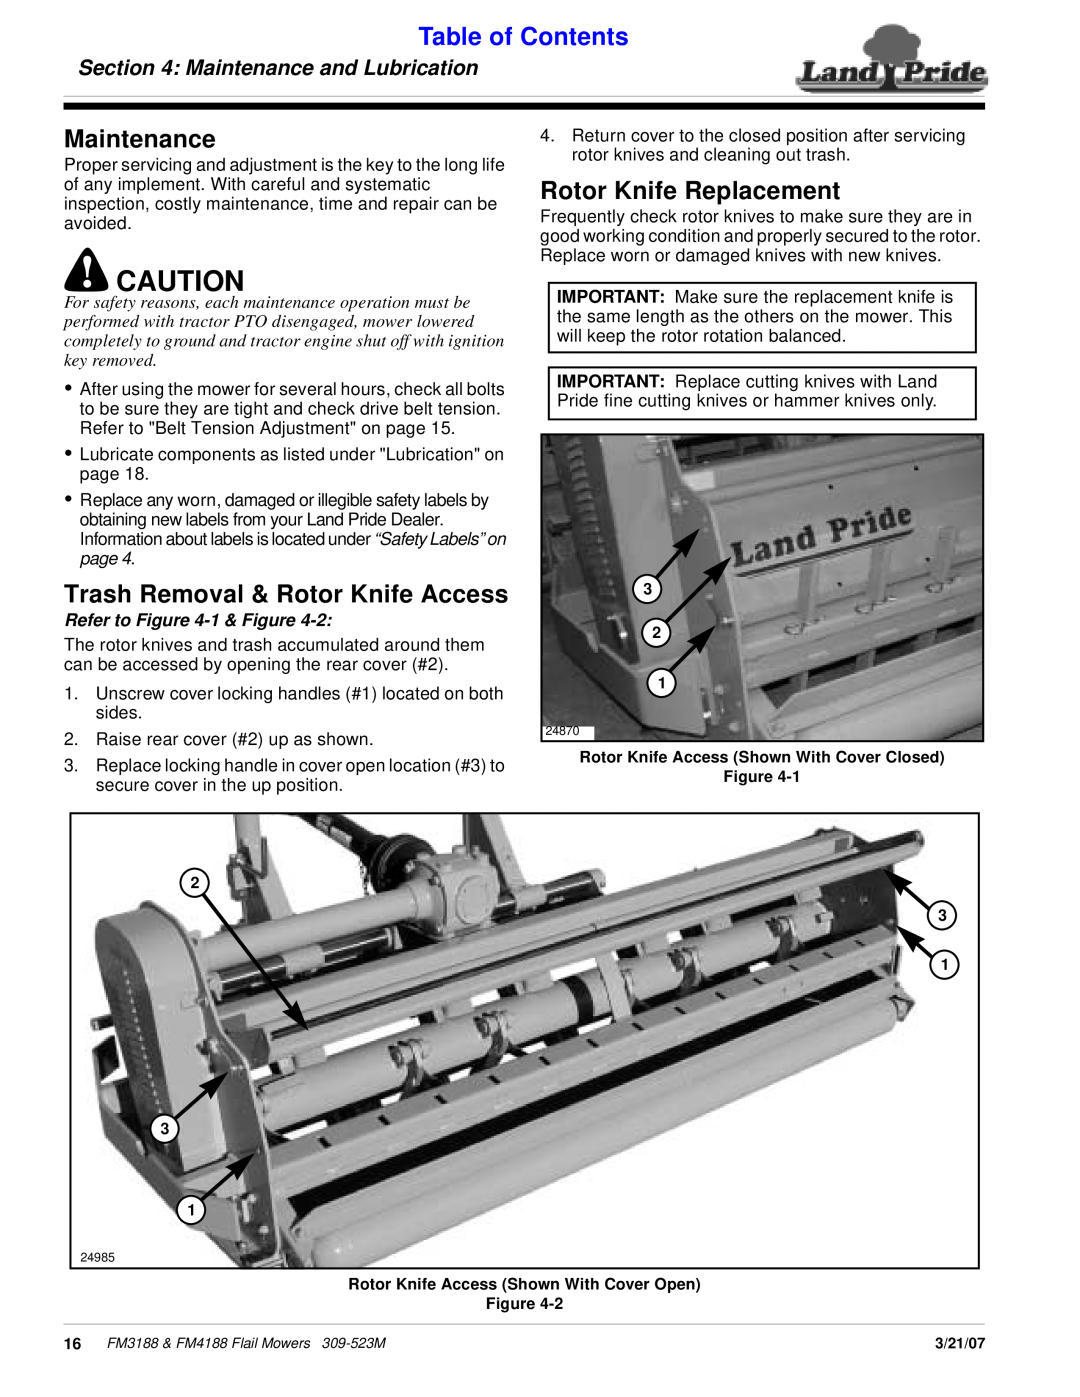 Land Pride FM4188, FM3188 Rotor Knife Replacement, Trash Removal & Rotor Knife Access, Maintenance and Lubrication 